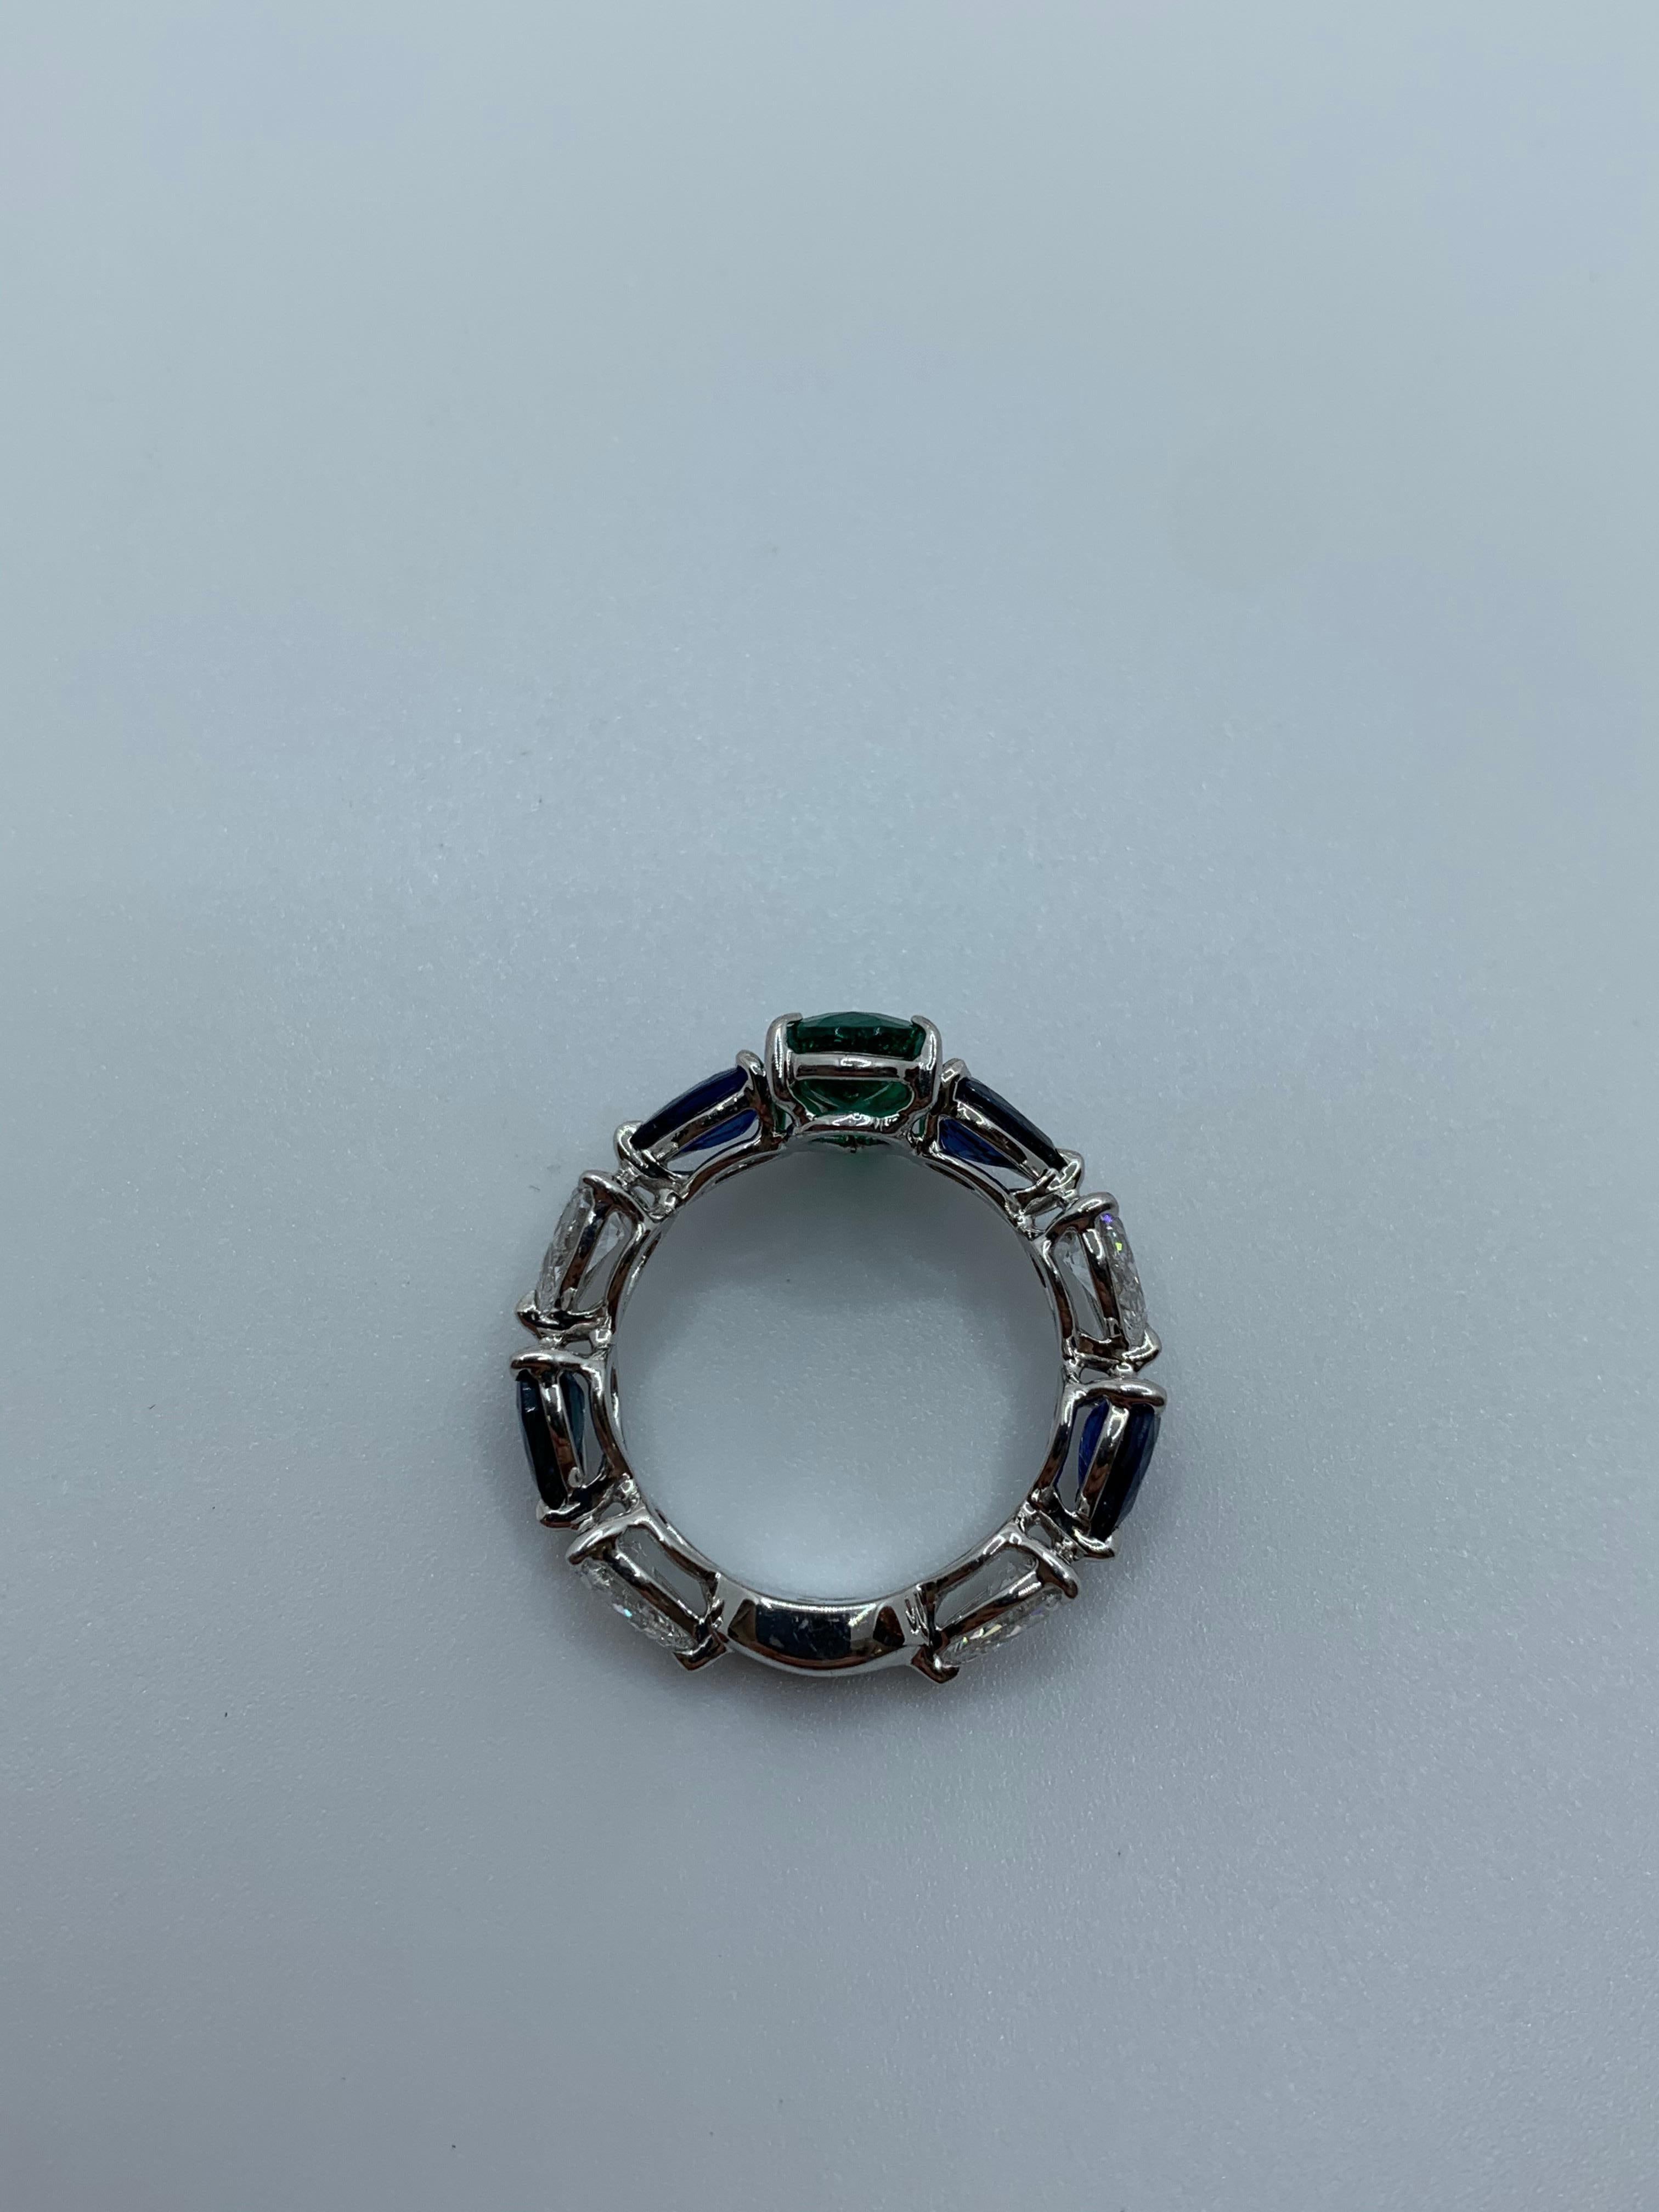 Pear Shaped Emerald, Sapphire and Diamond Ring. This Ring is part of a Suite and can be purchased individually.

Striking Ring and color combination. The gorgeous Colombian Emerald matched with the beautiful Ceylon Sapphires play as if they are one